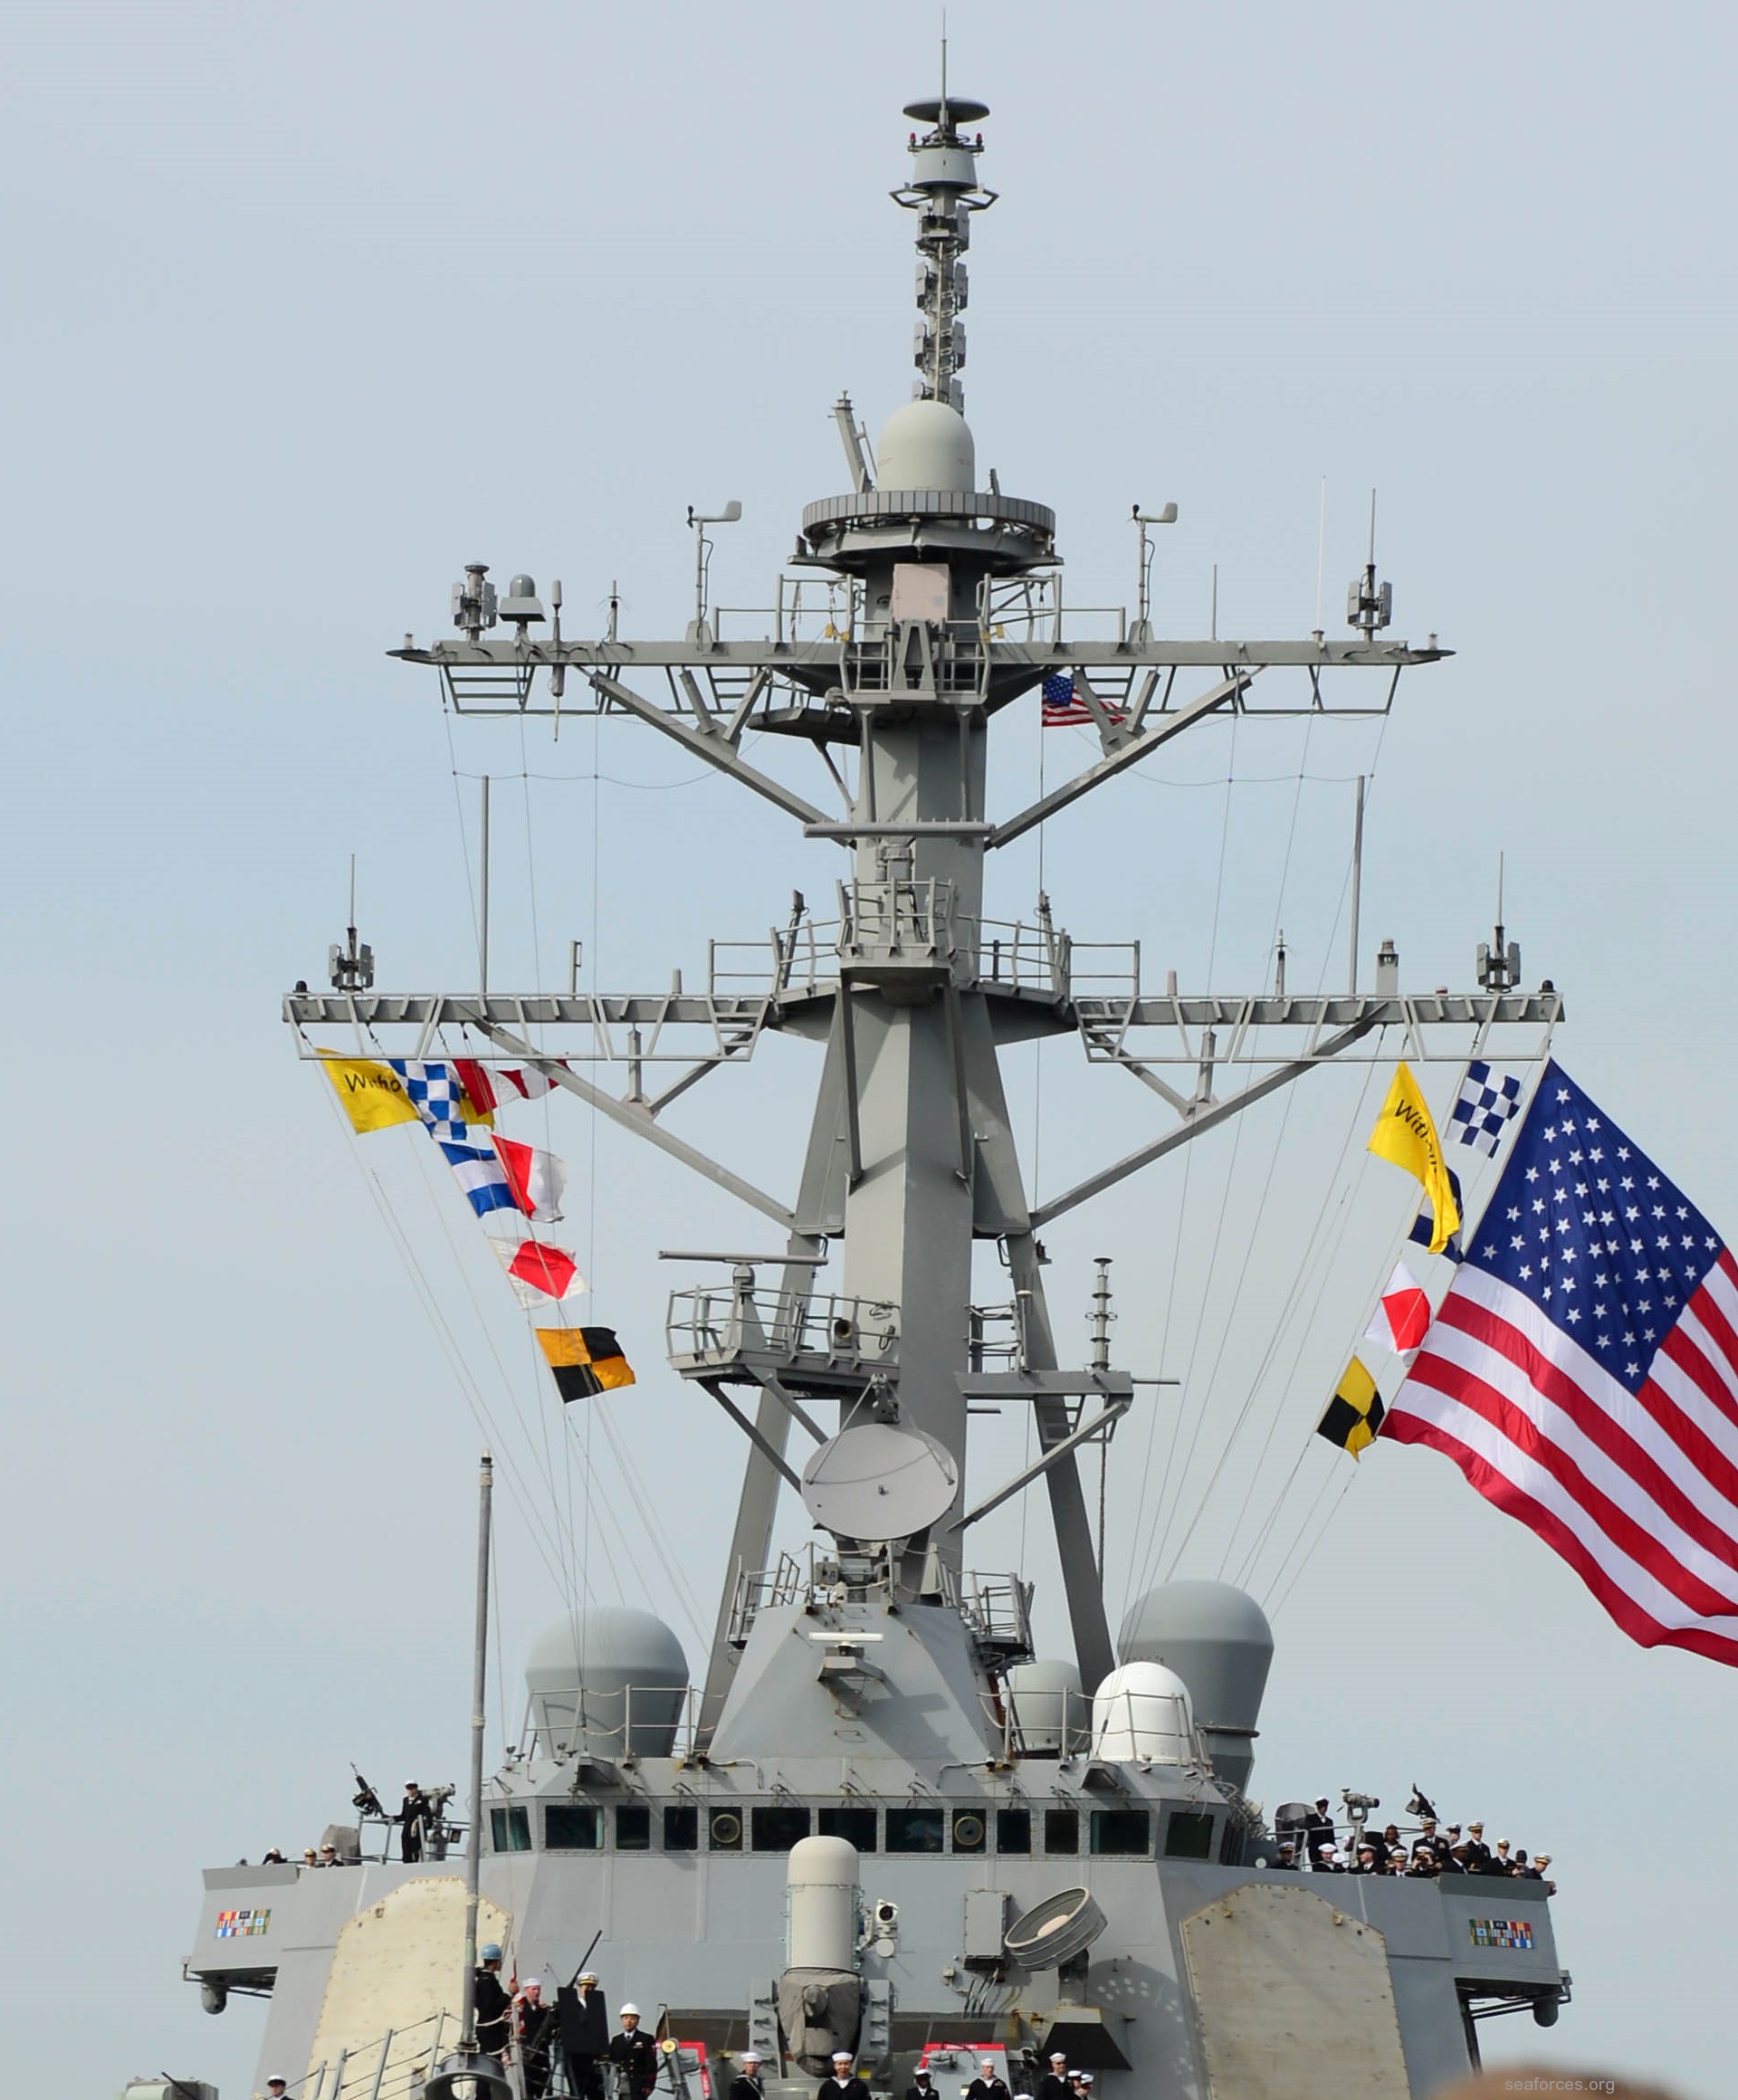 ddg-58 uss laboon guided missile destroyer us navy 43 main mast